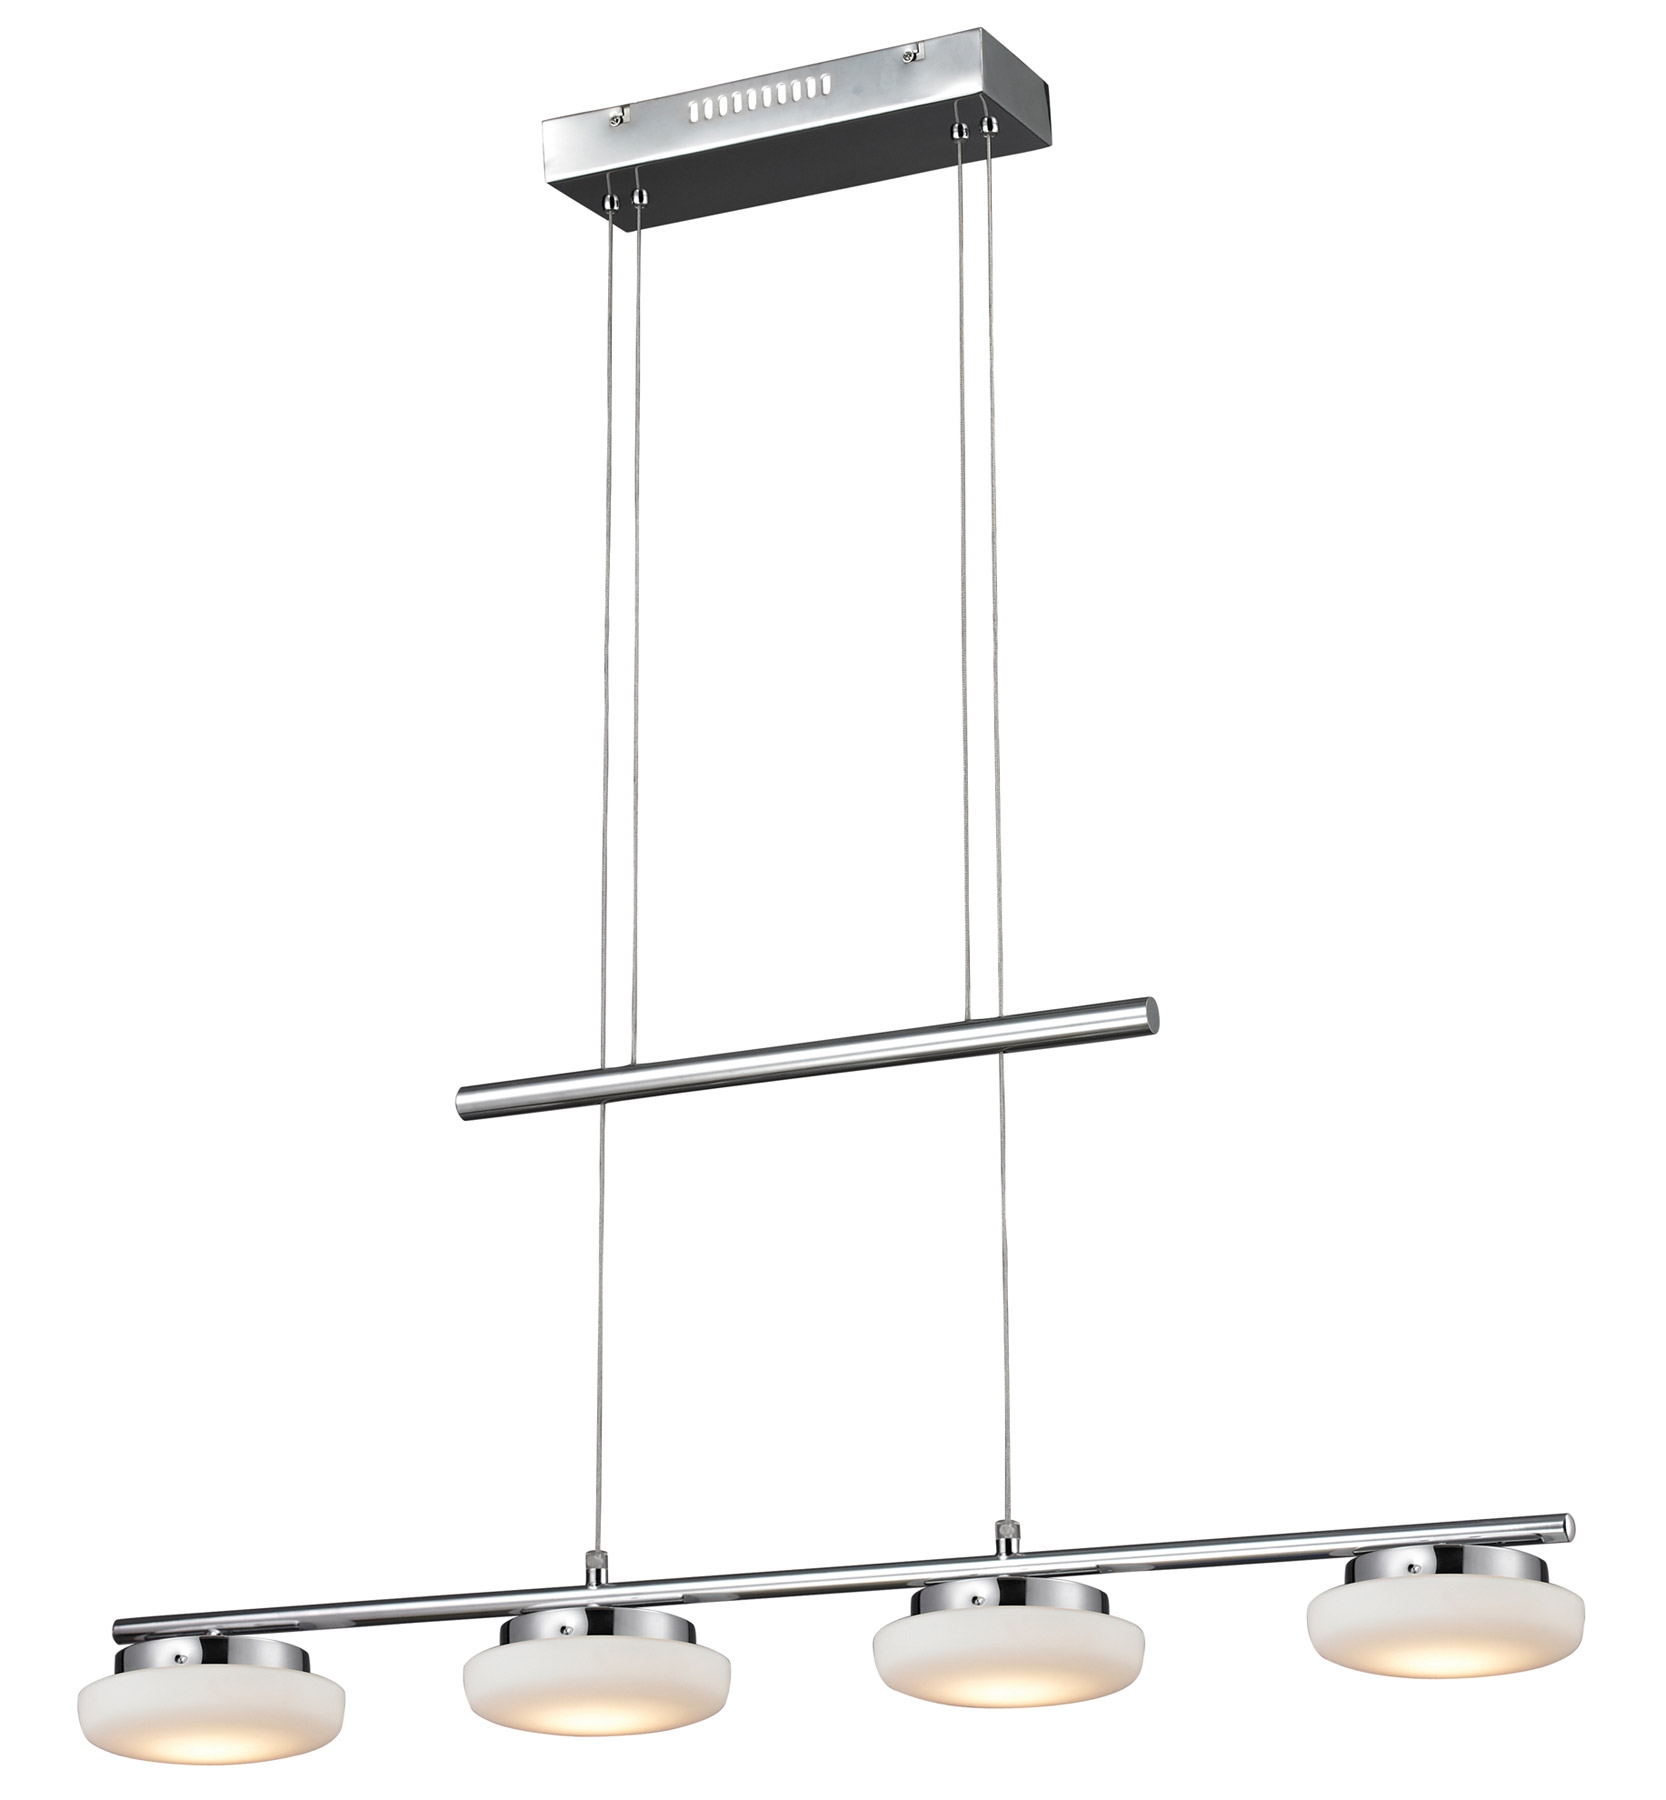 Retractable Pull Down Ceiling Light